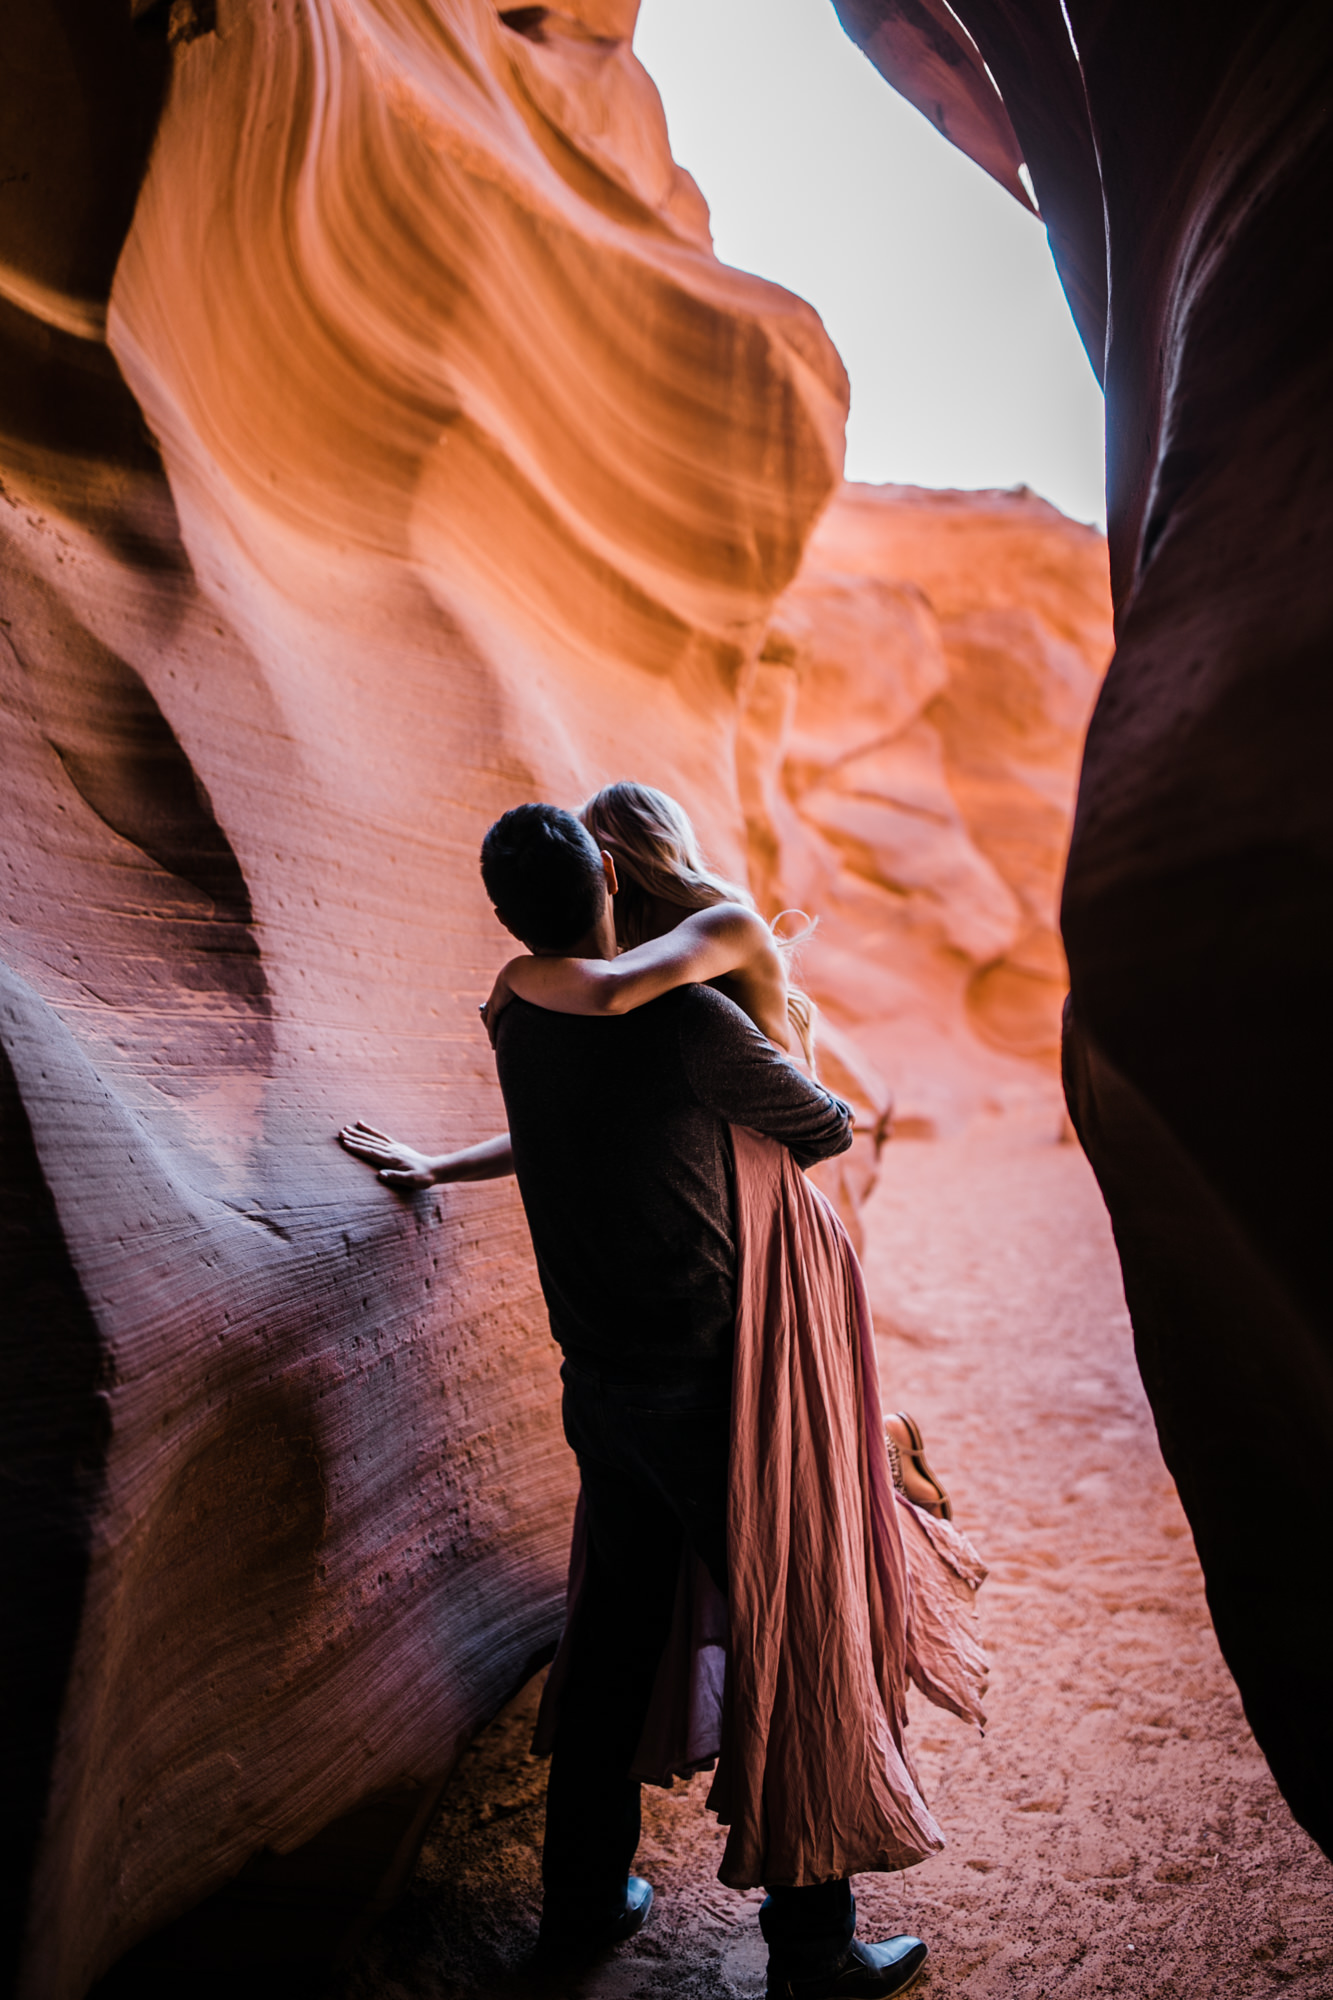 adventure elopement session in antelope canyon | destination engagement photo inspiration | utah adventure elopement photographers | the hearnes adventure photography | www.thehearnes.com